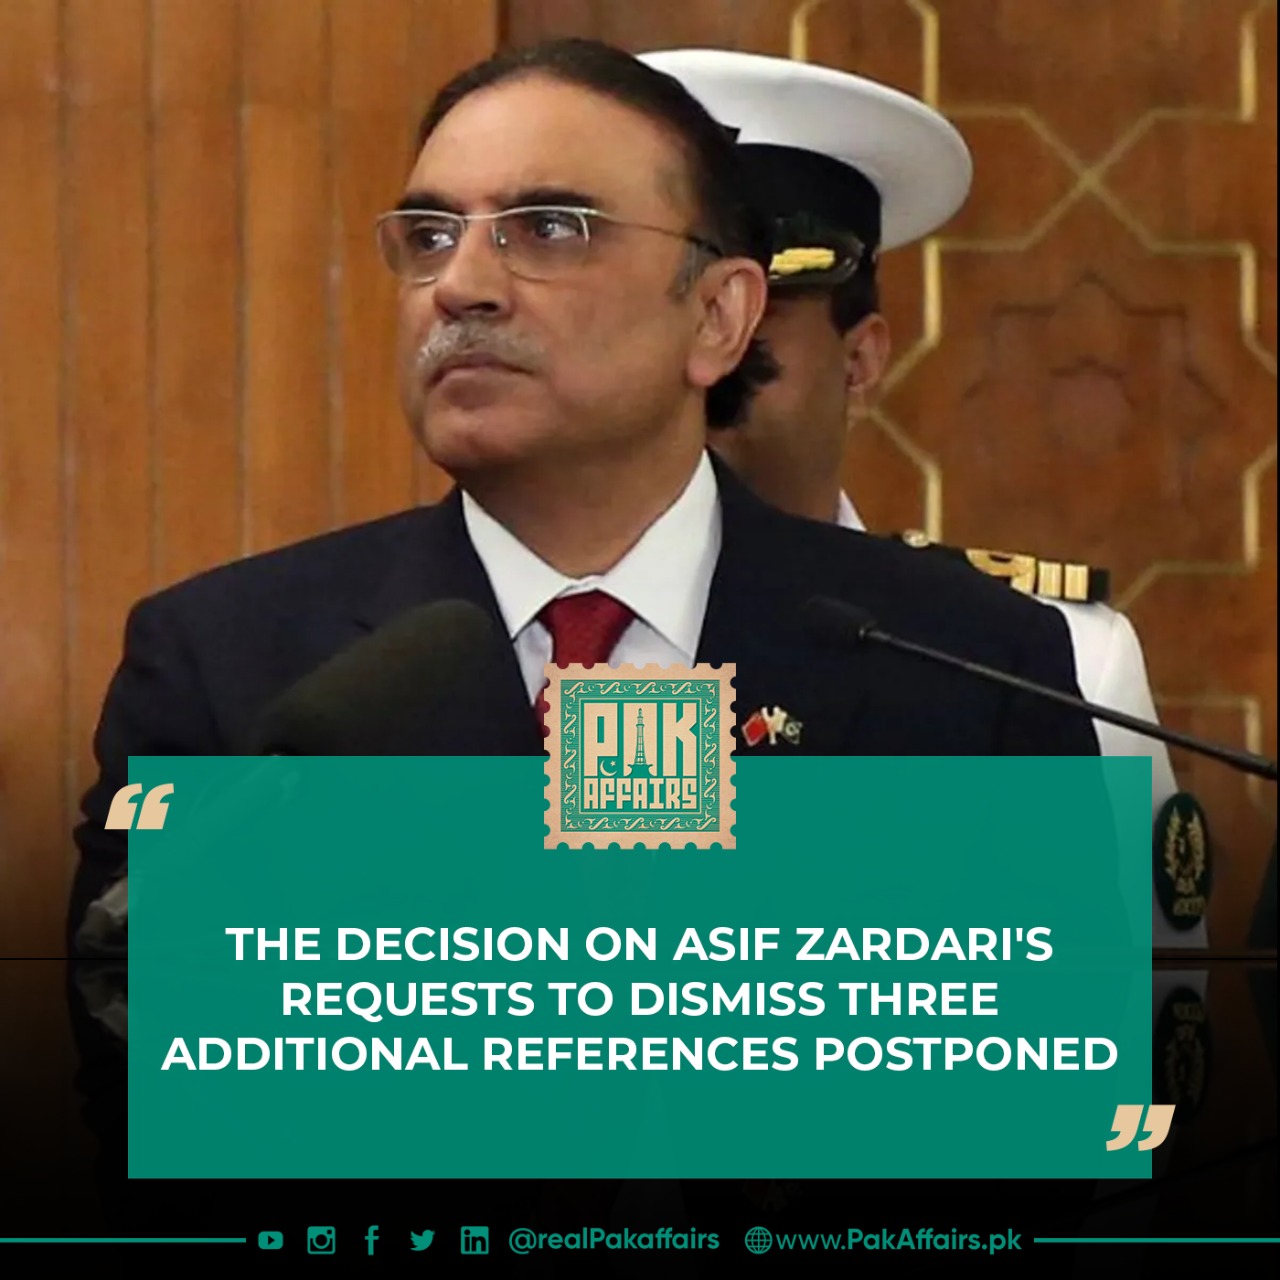 The decision on Asif Zardari's requests to dismiss three additional references postponed